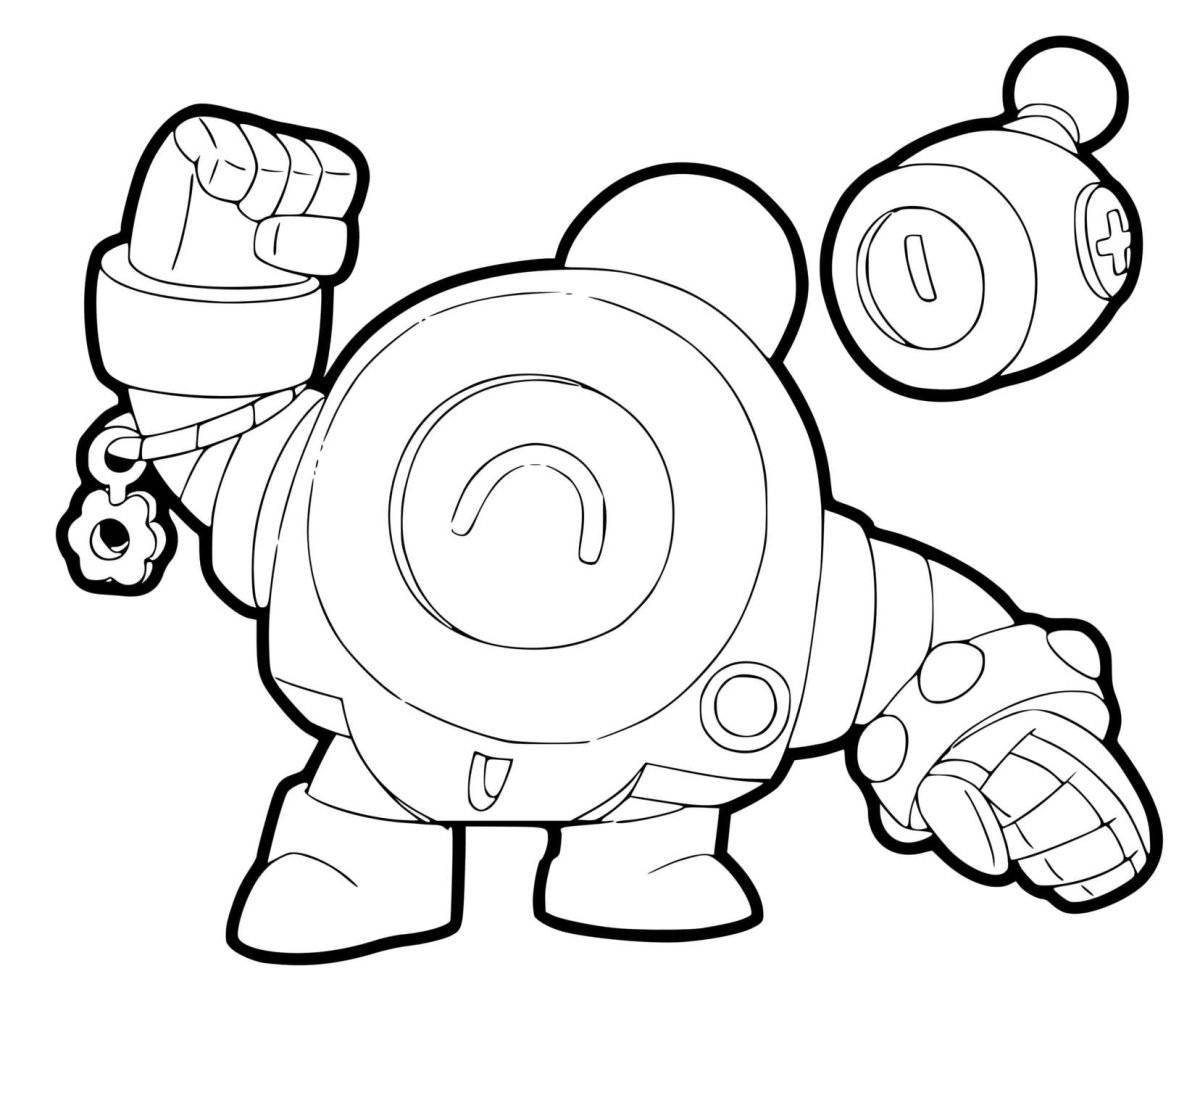 Animated fighters brawl stars coloring book